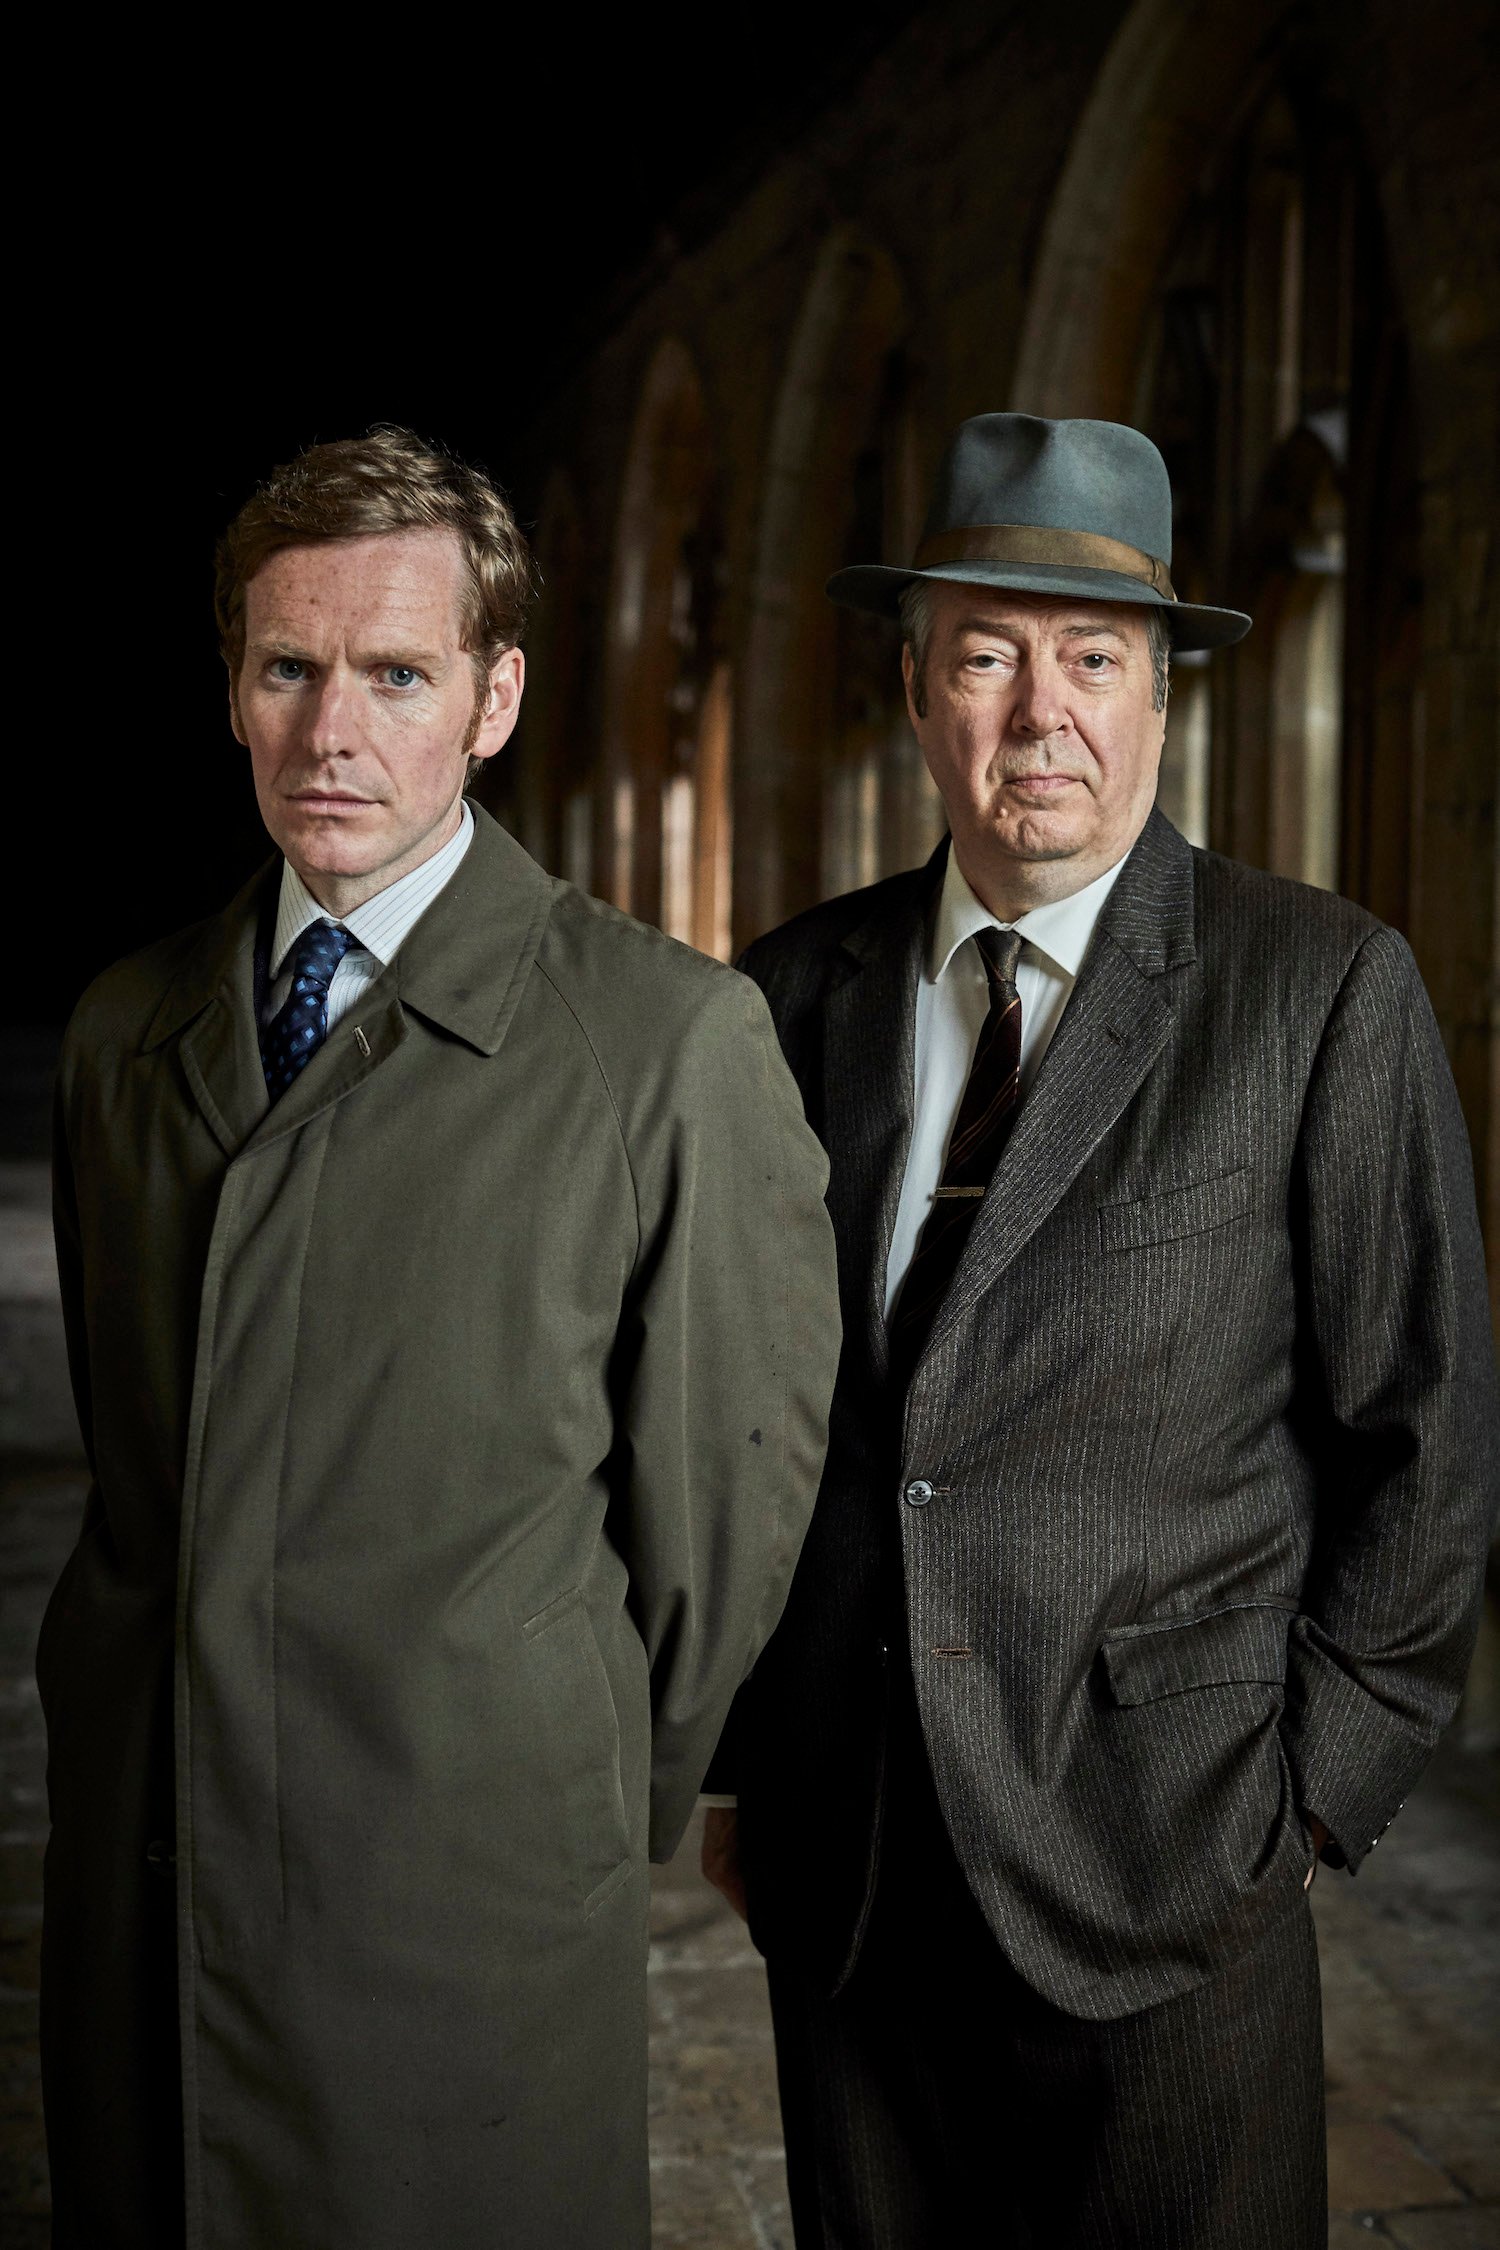 Shaun Evans as Morse and Roger Allam as Fred Thursday in 'Endeavour' on PBS